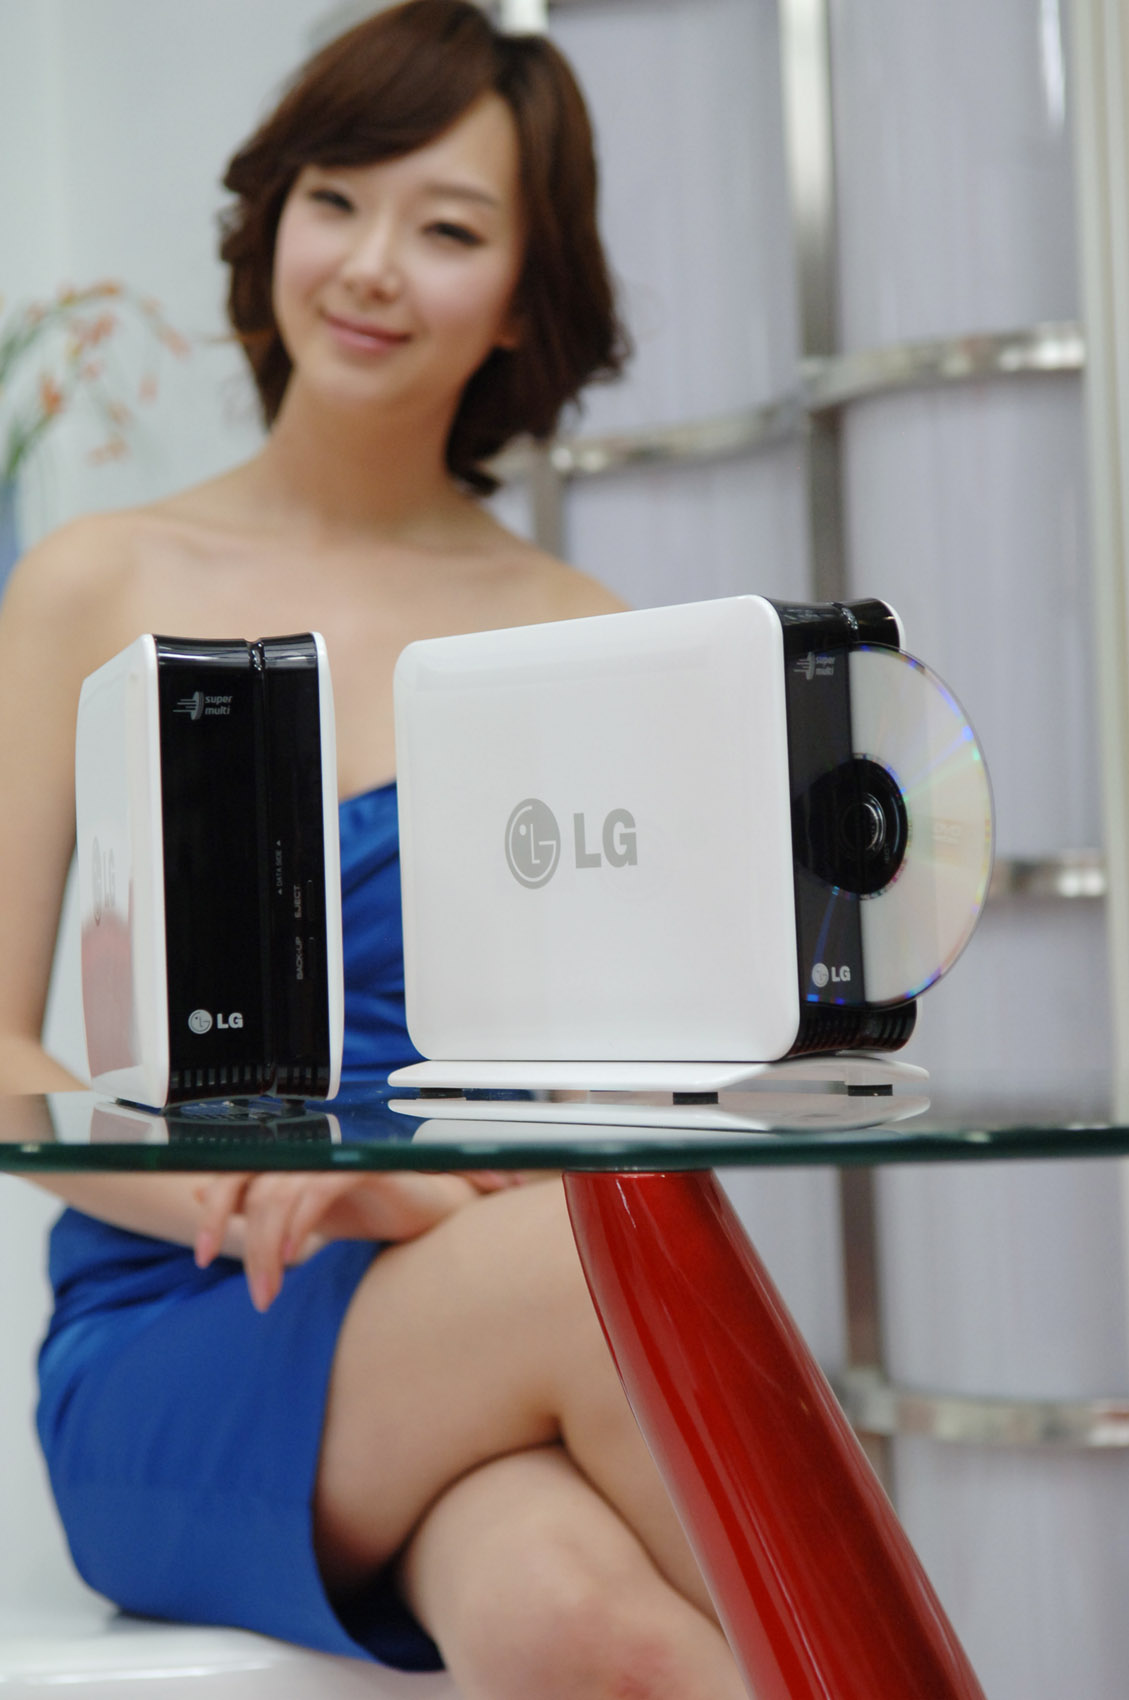 the woman is posing with her small electronic device